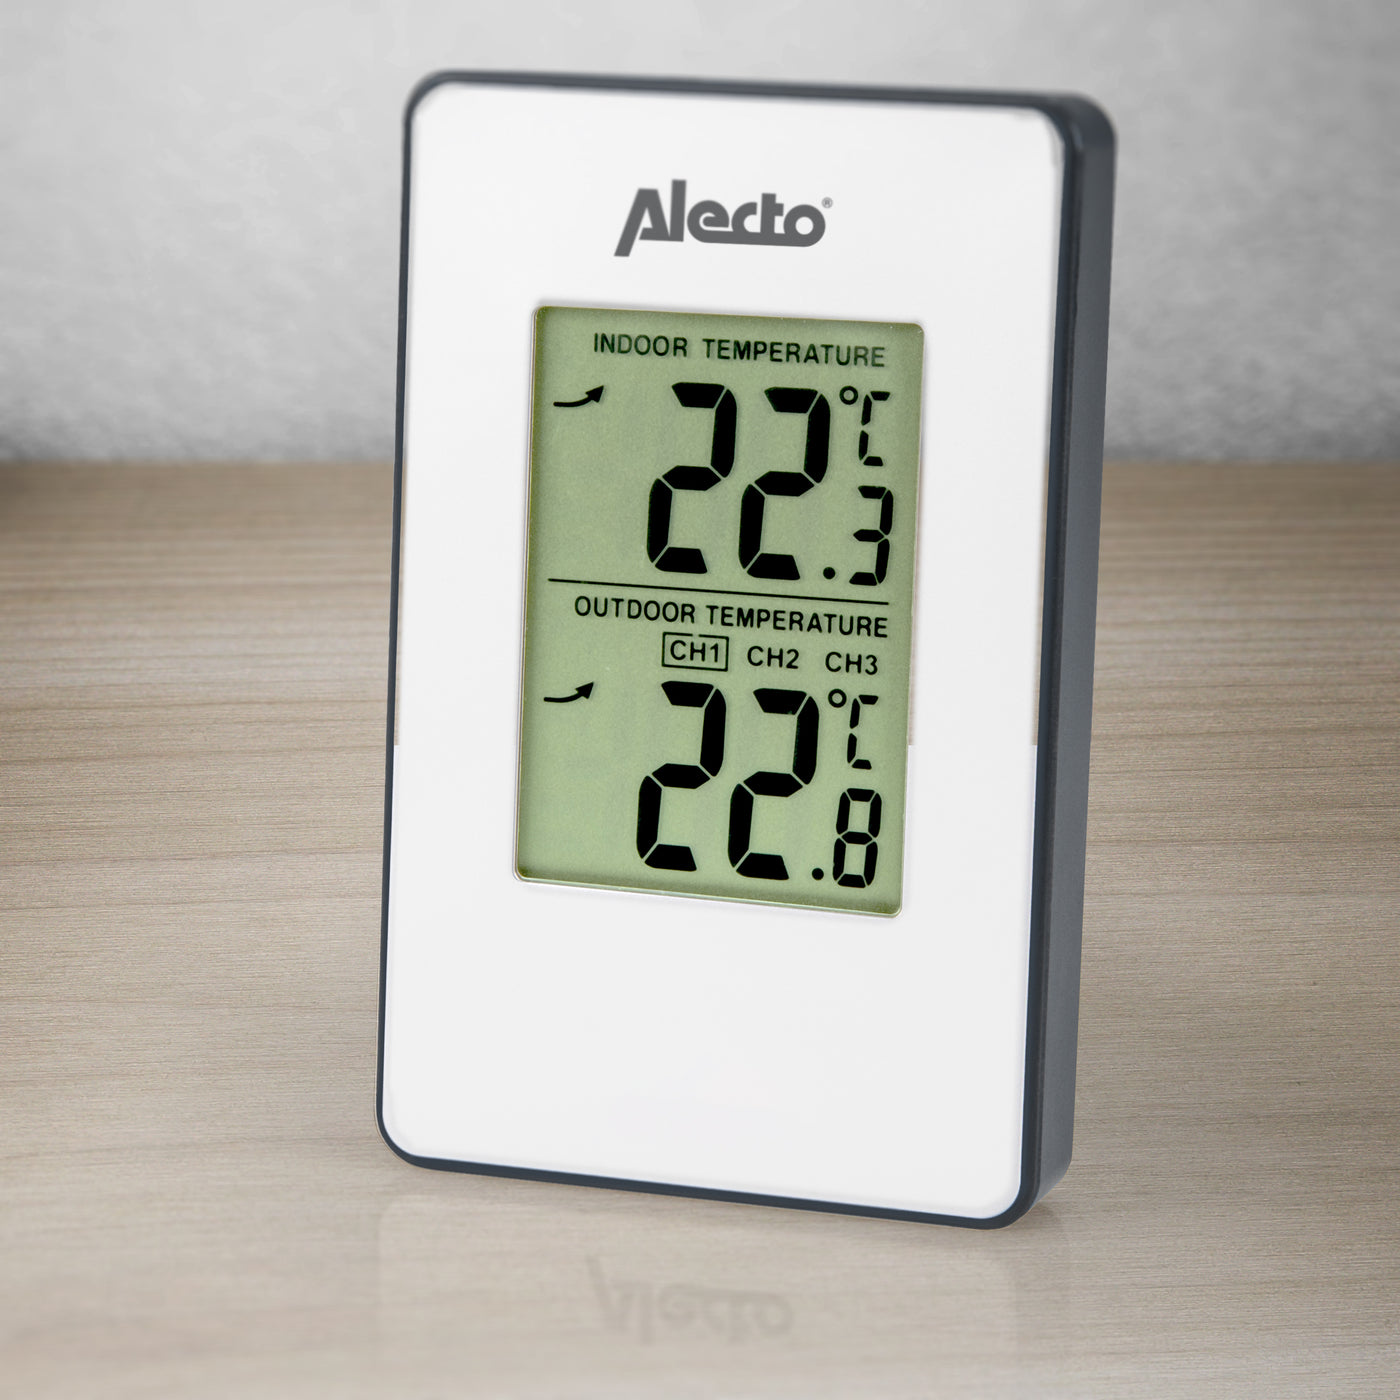 Alecto WS-1050 - Weather station with wireless sensor